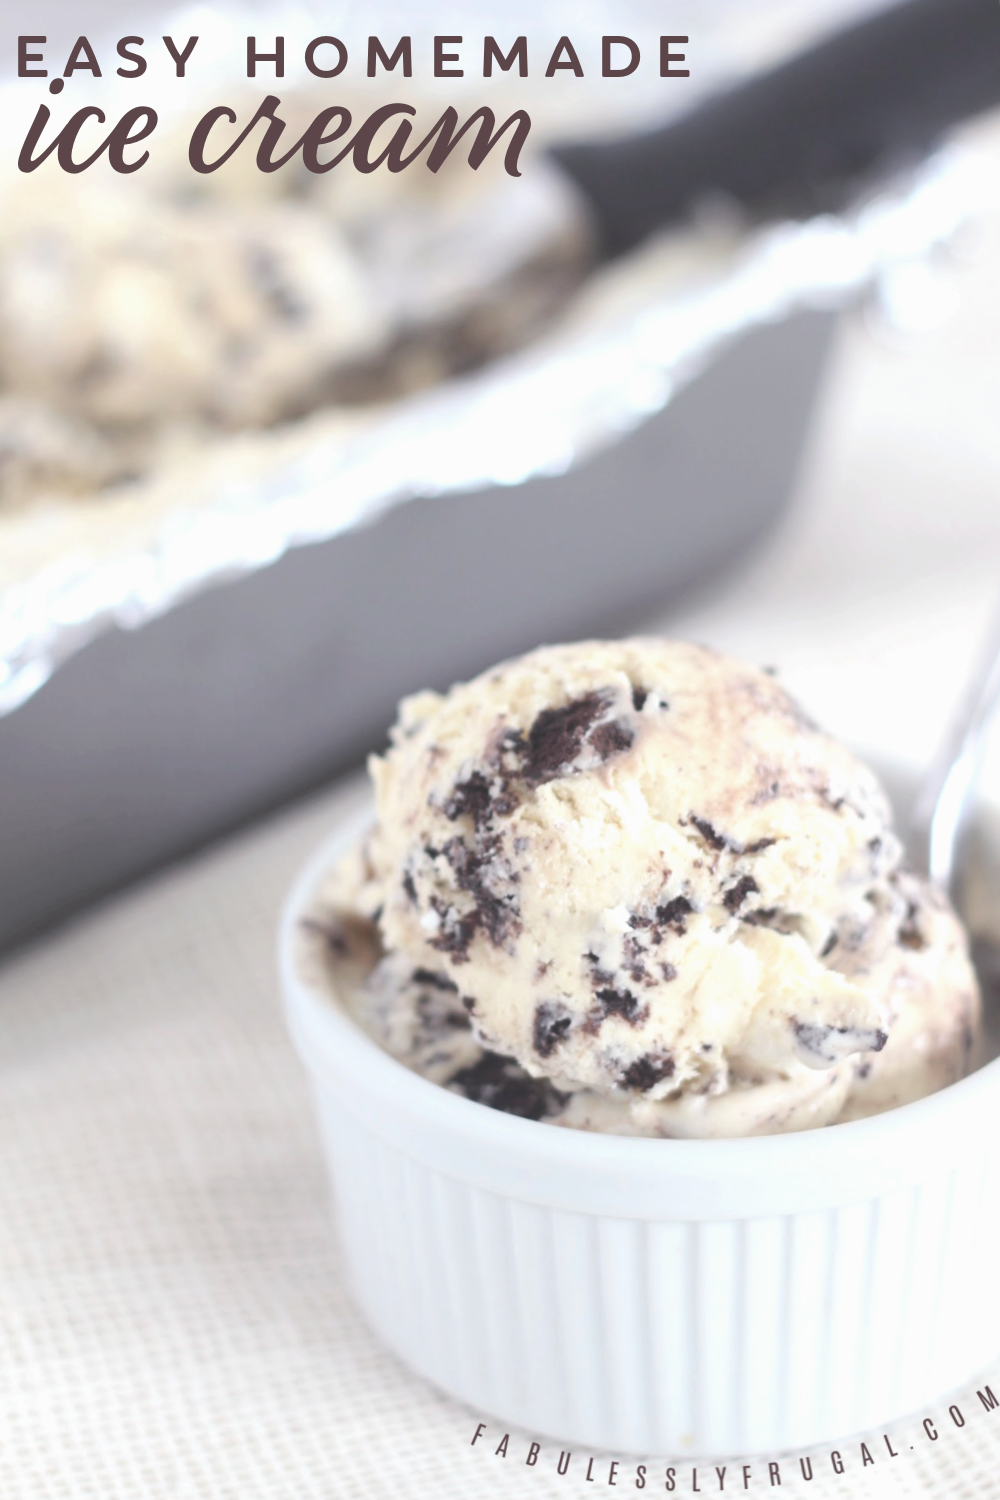 Easy homemade ice cream without a machine